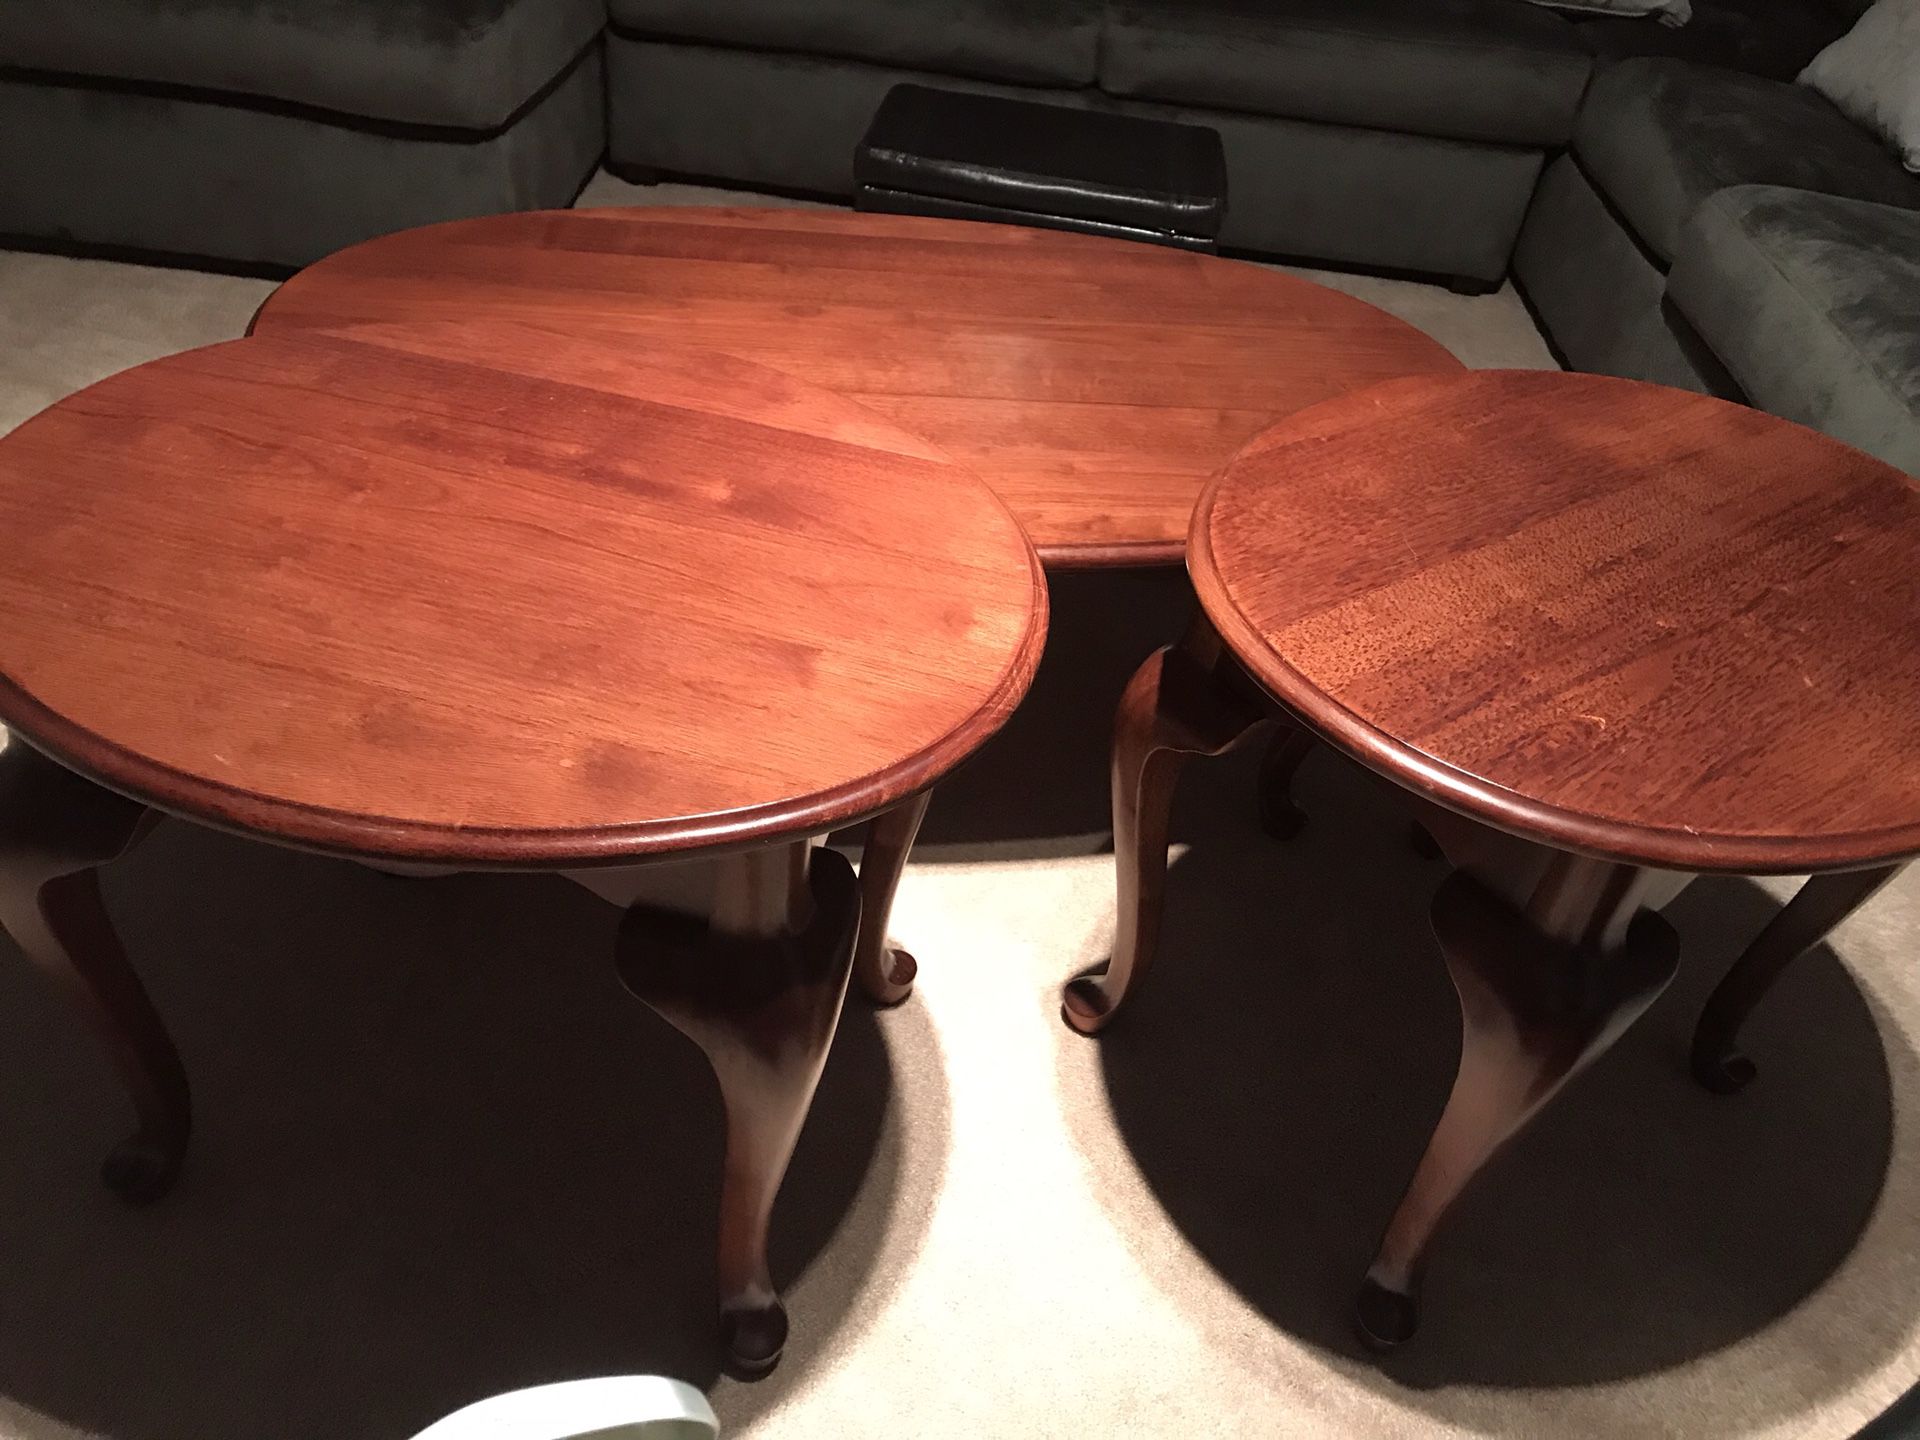 Wooden coffee table with two sides